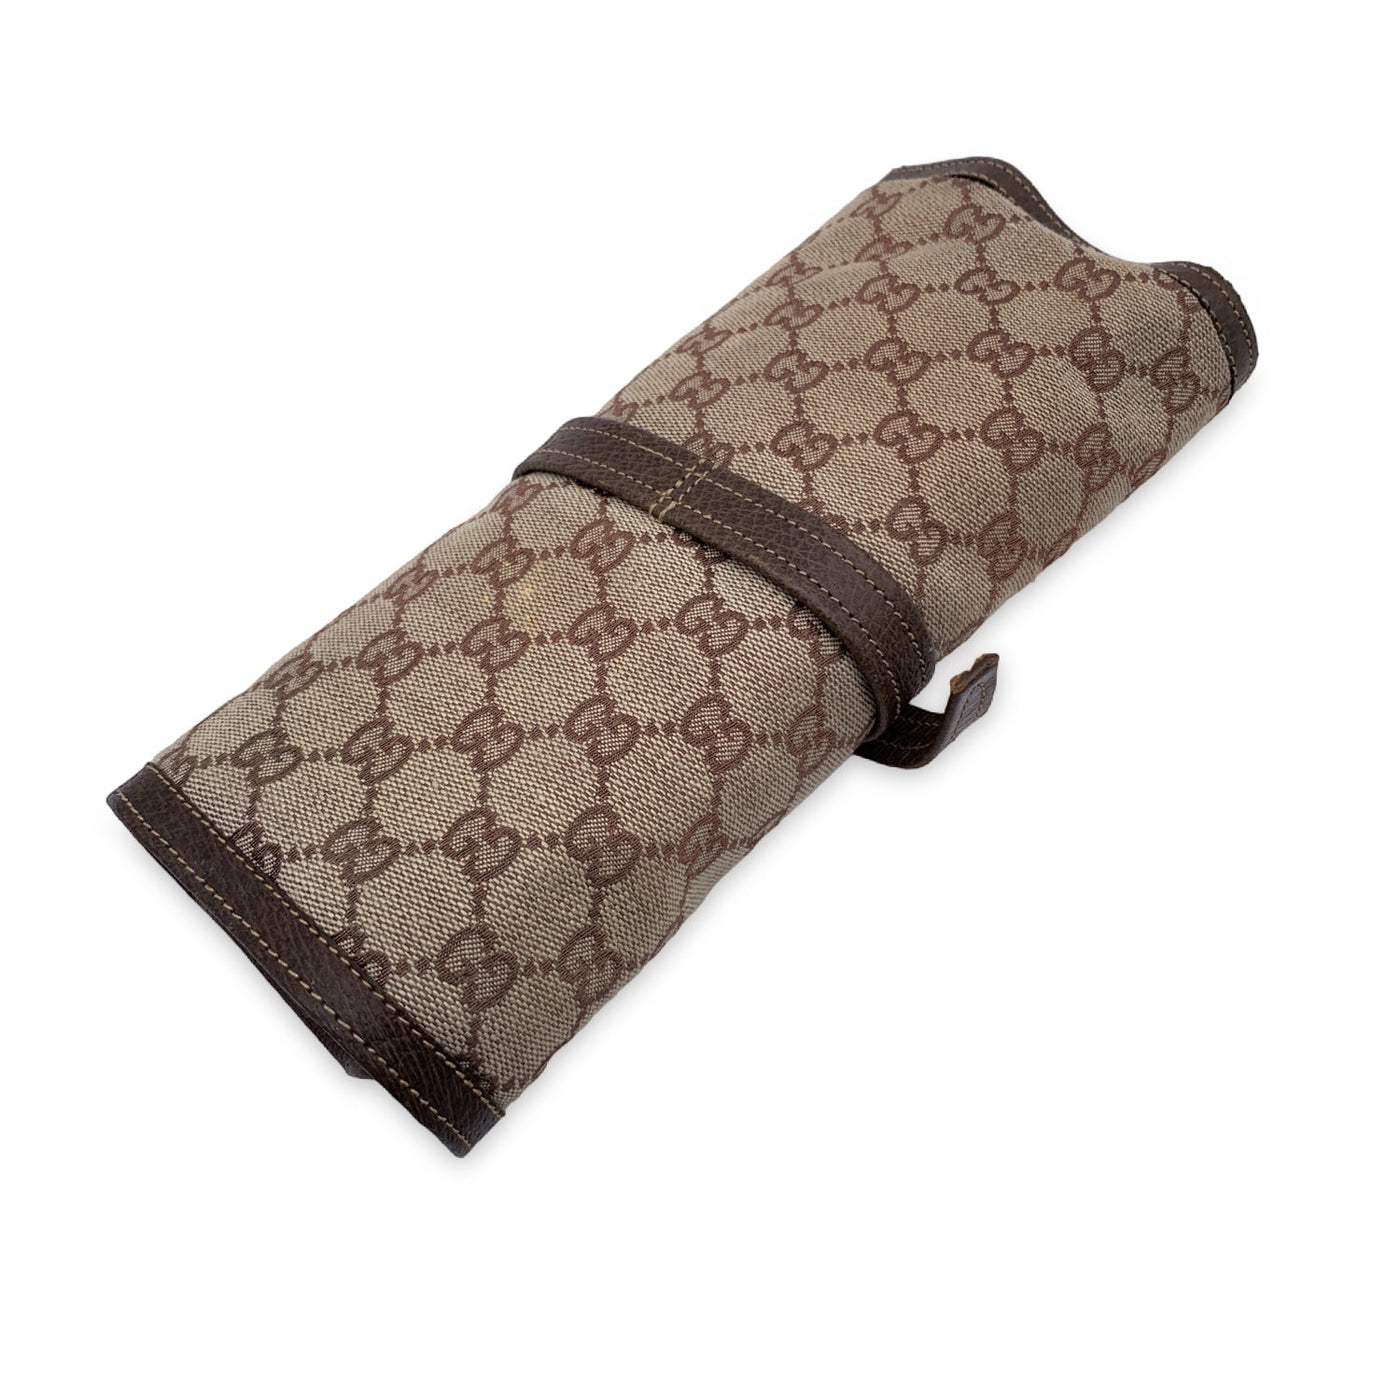 Authentic Gucci Vintage Monogram Canvas Jewelry Roll Holder Travel